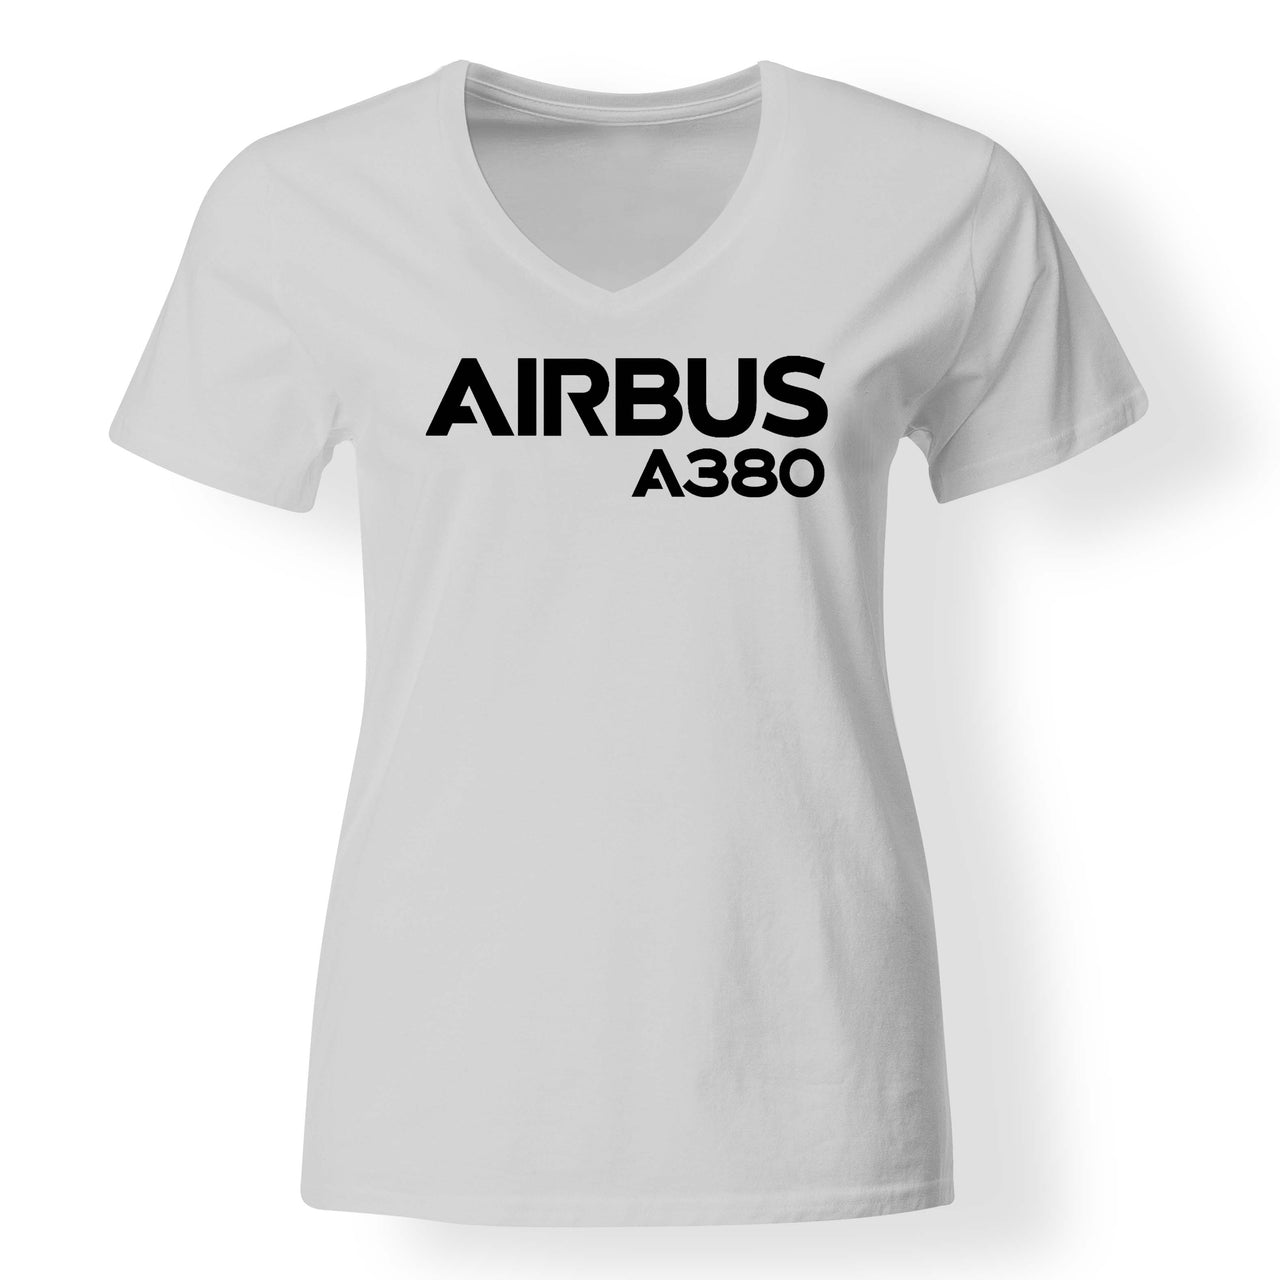 Airbus A380 & Text Designed V-Neck T-Shirts